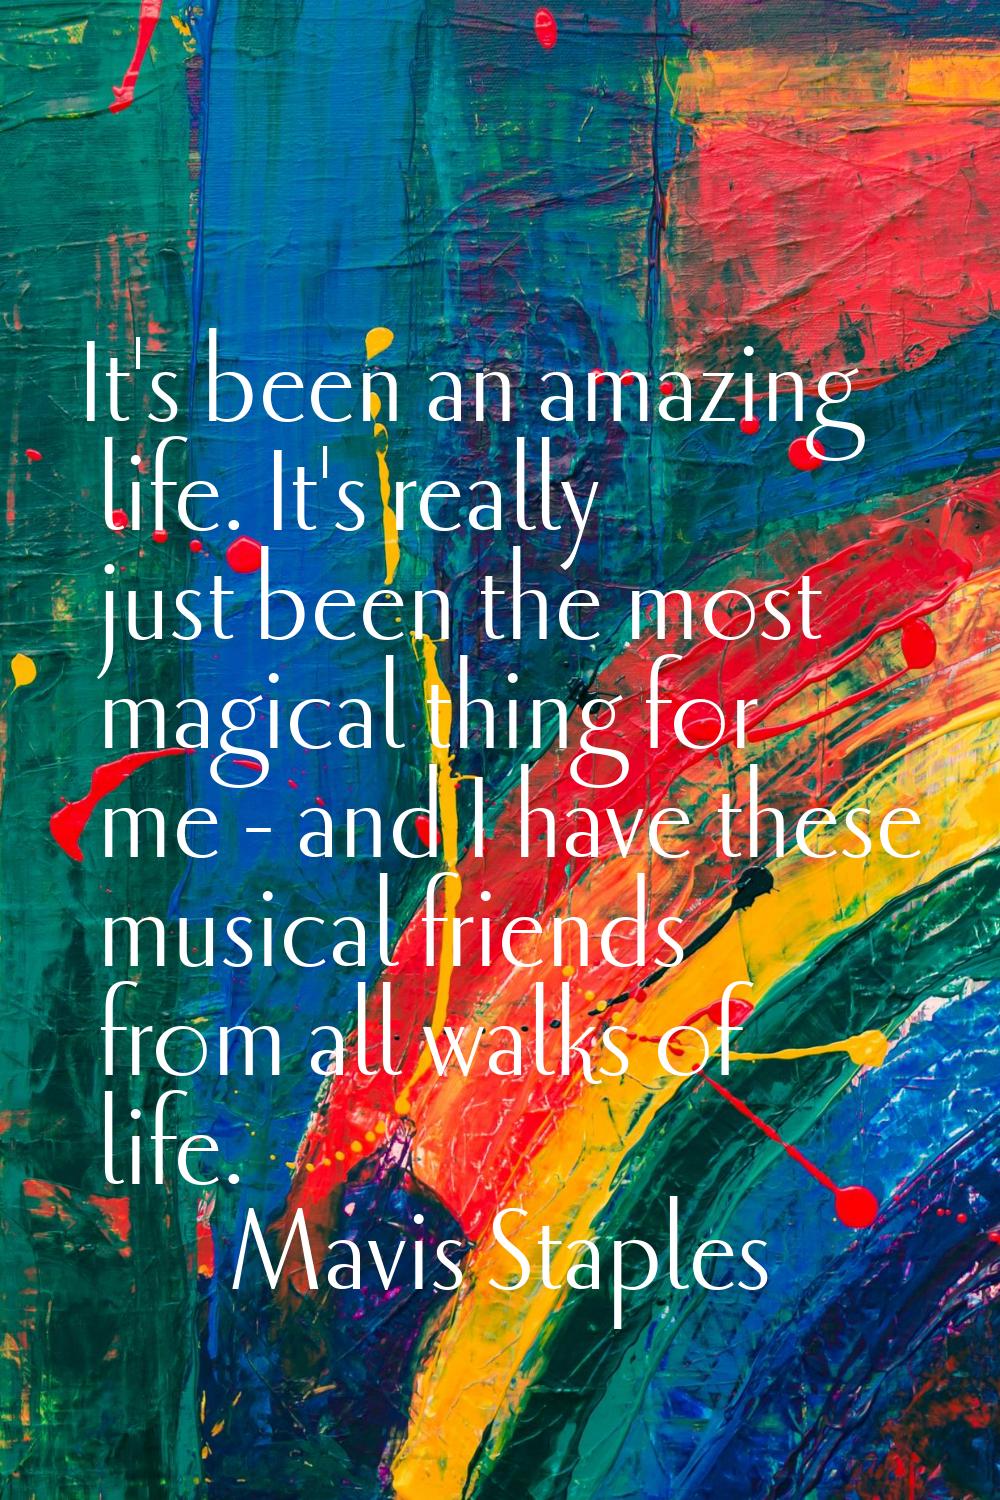 It's been an amazing life. It's really just been the most magical thing for me - and I have these m